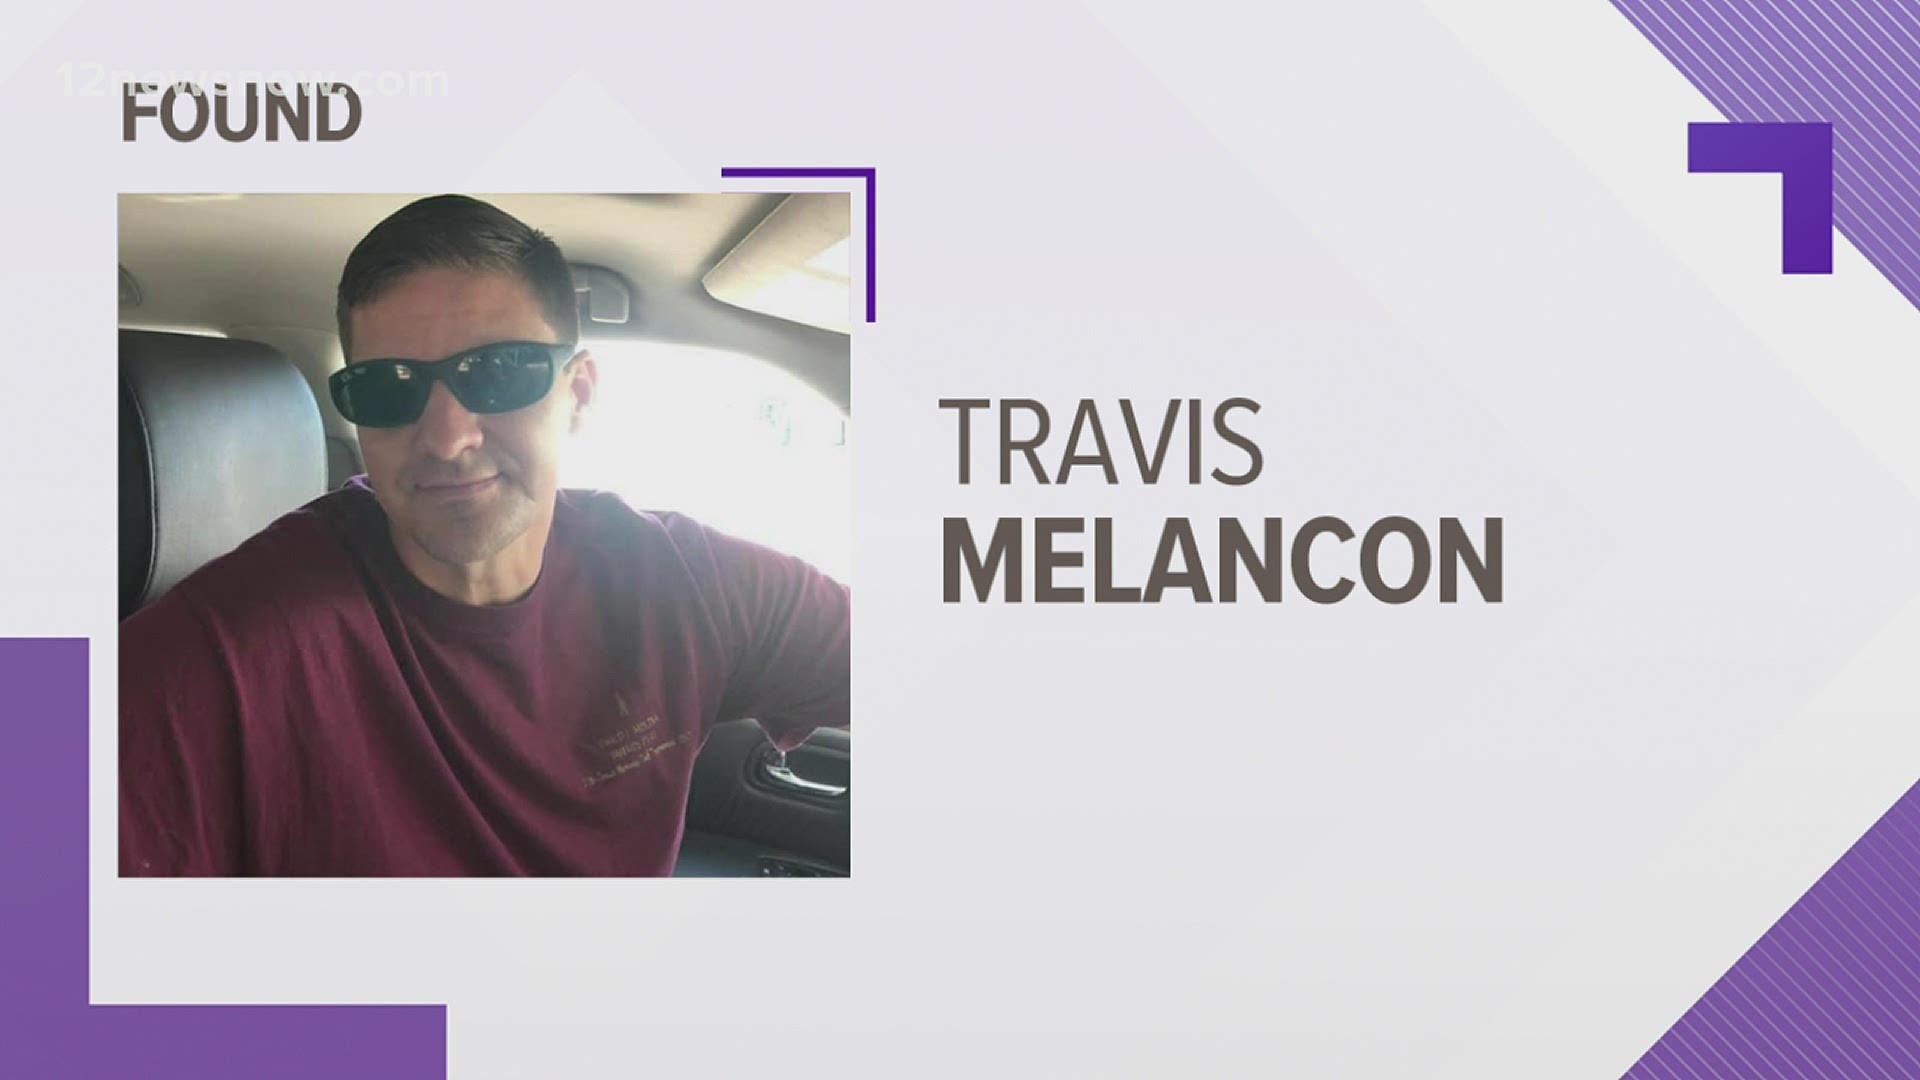 Travis Melancon was reported missing on Saturday